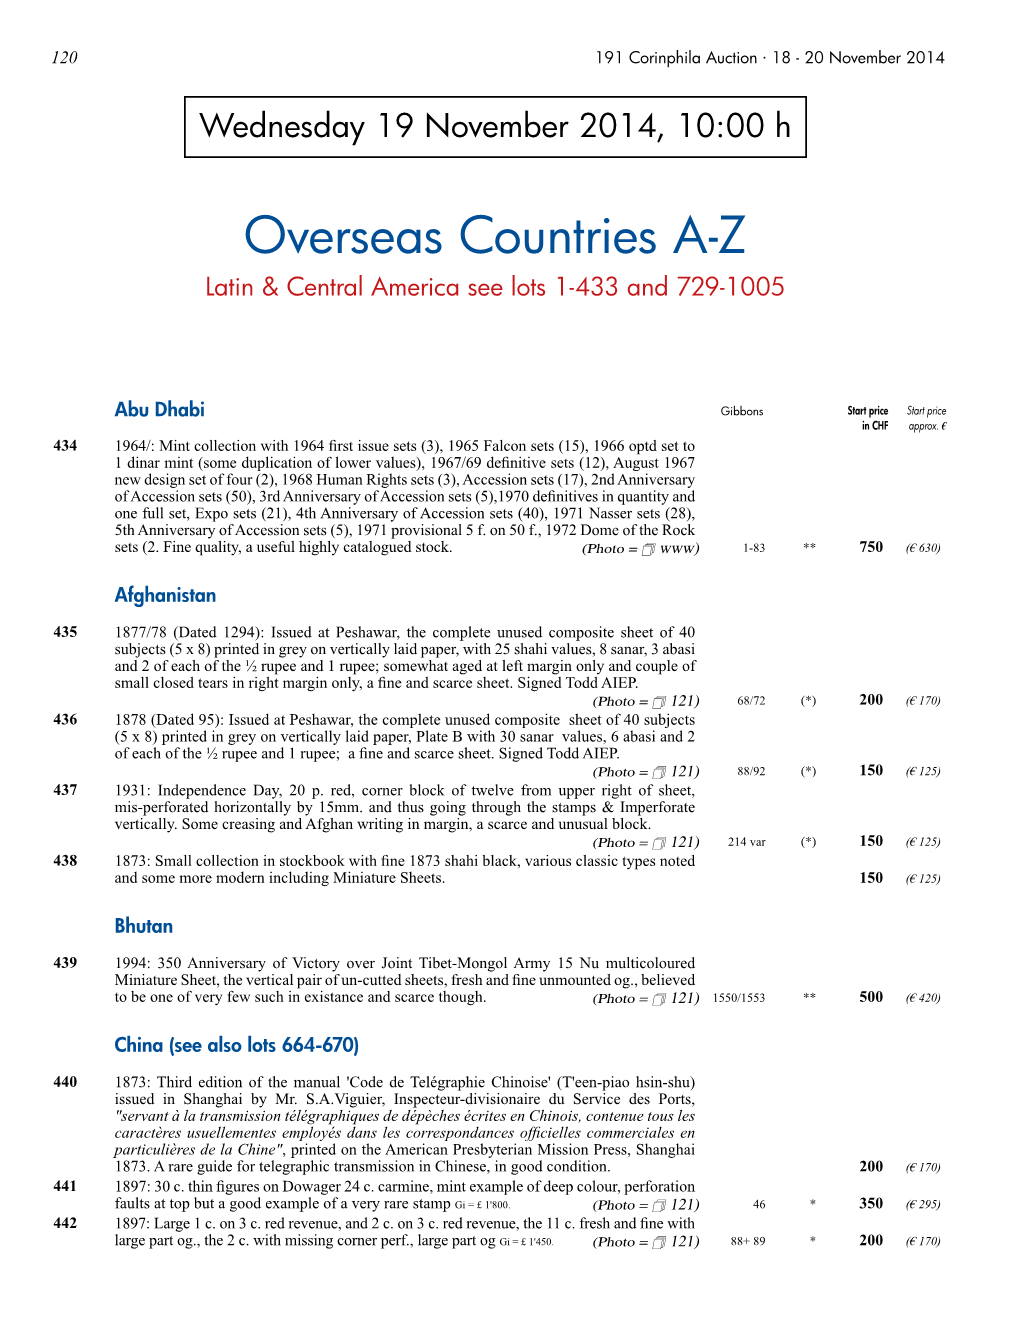 Overseas Countries A-Z Latin & Central America See Lots 1-433 and 729-1005